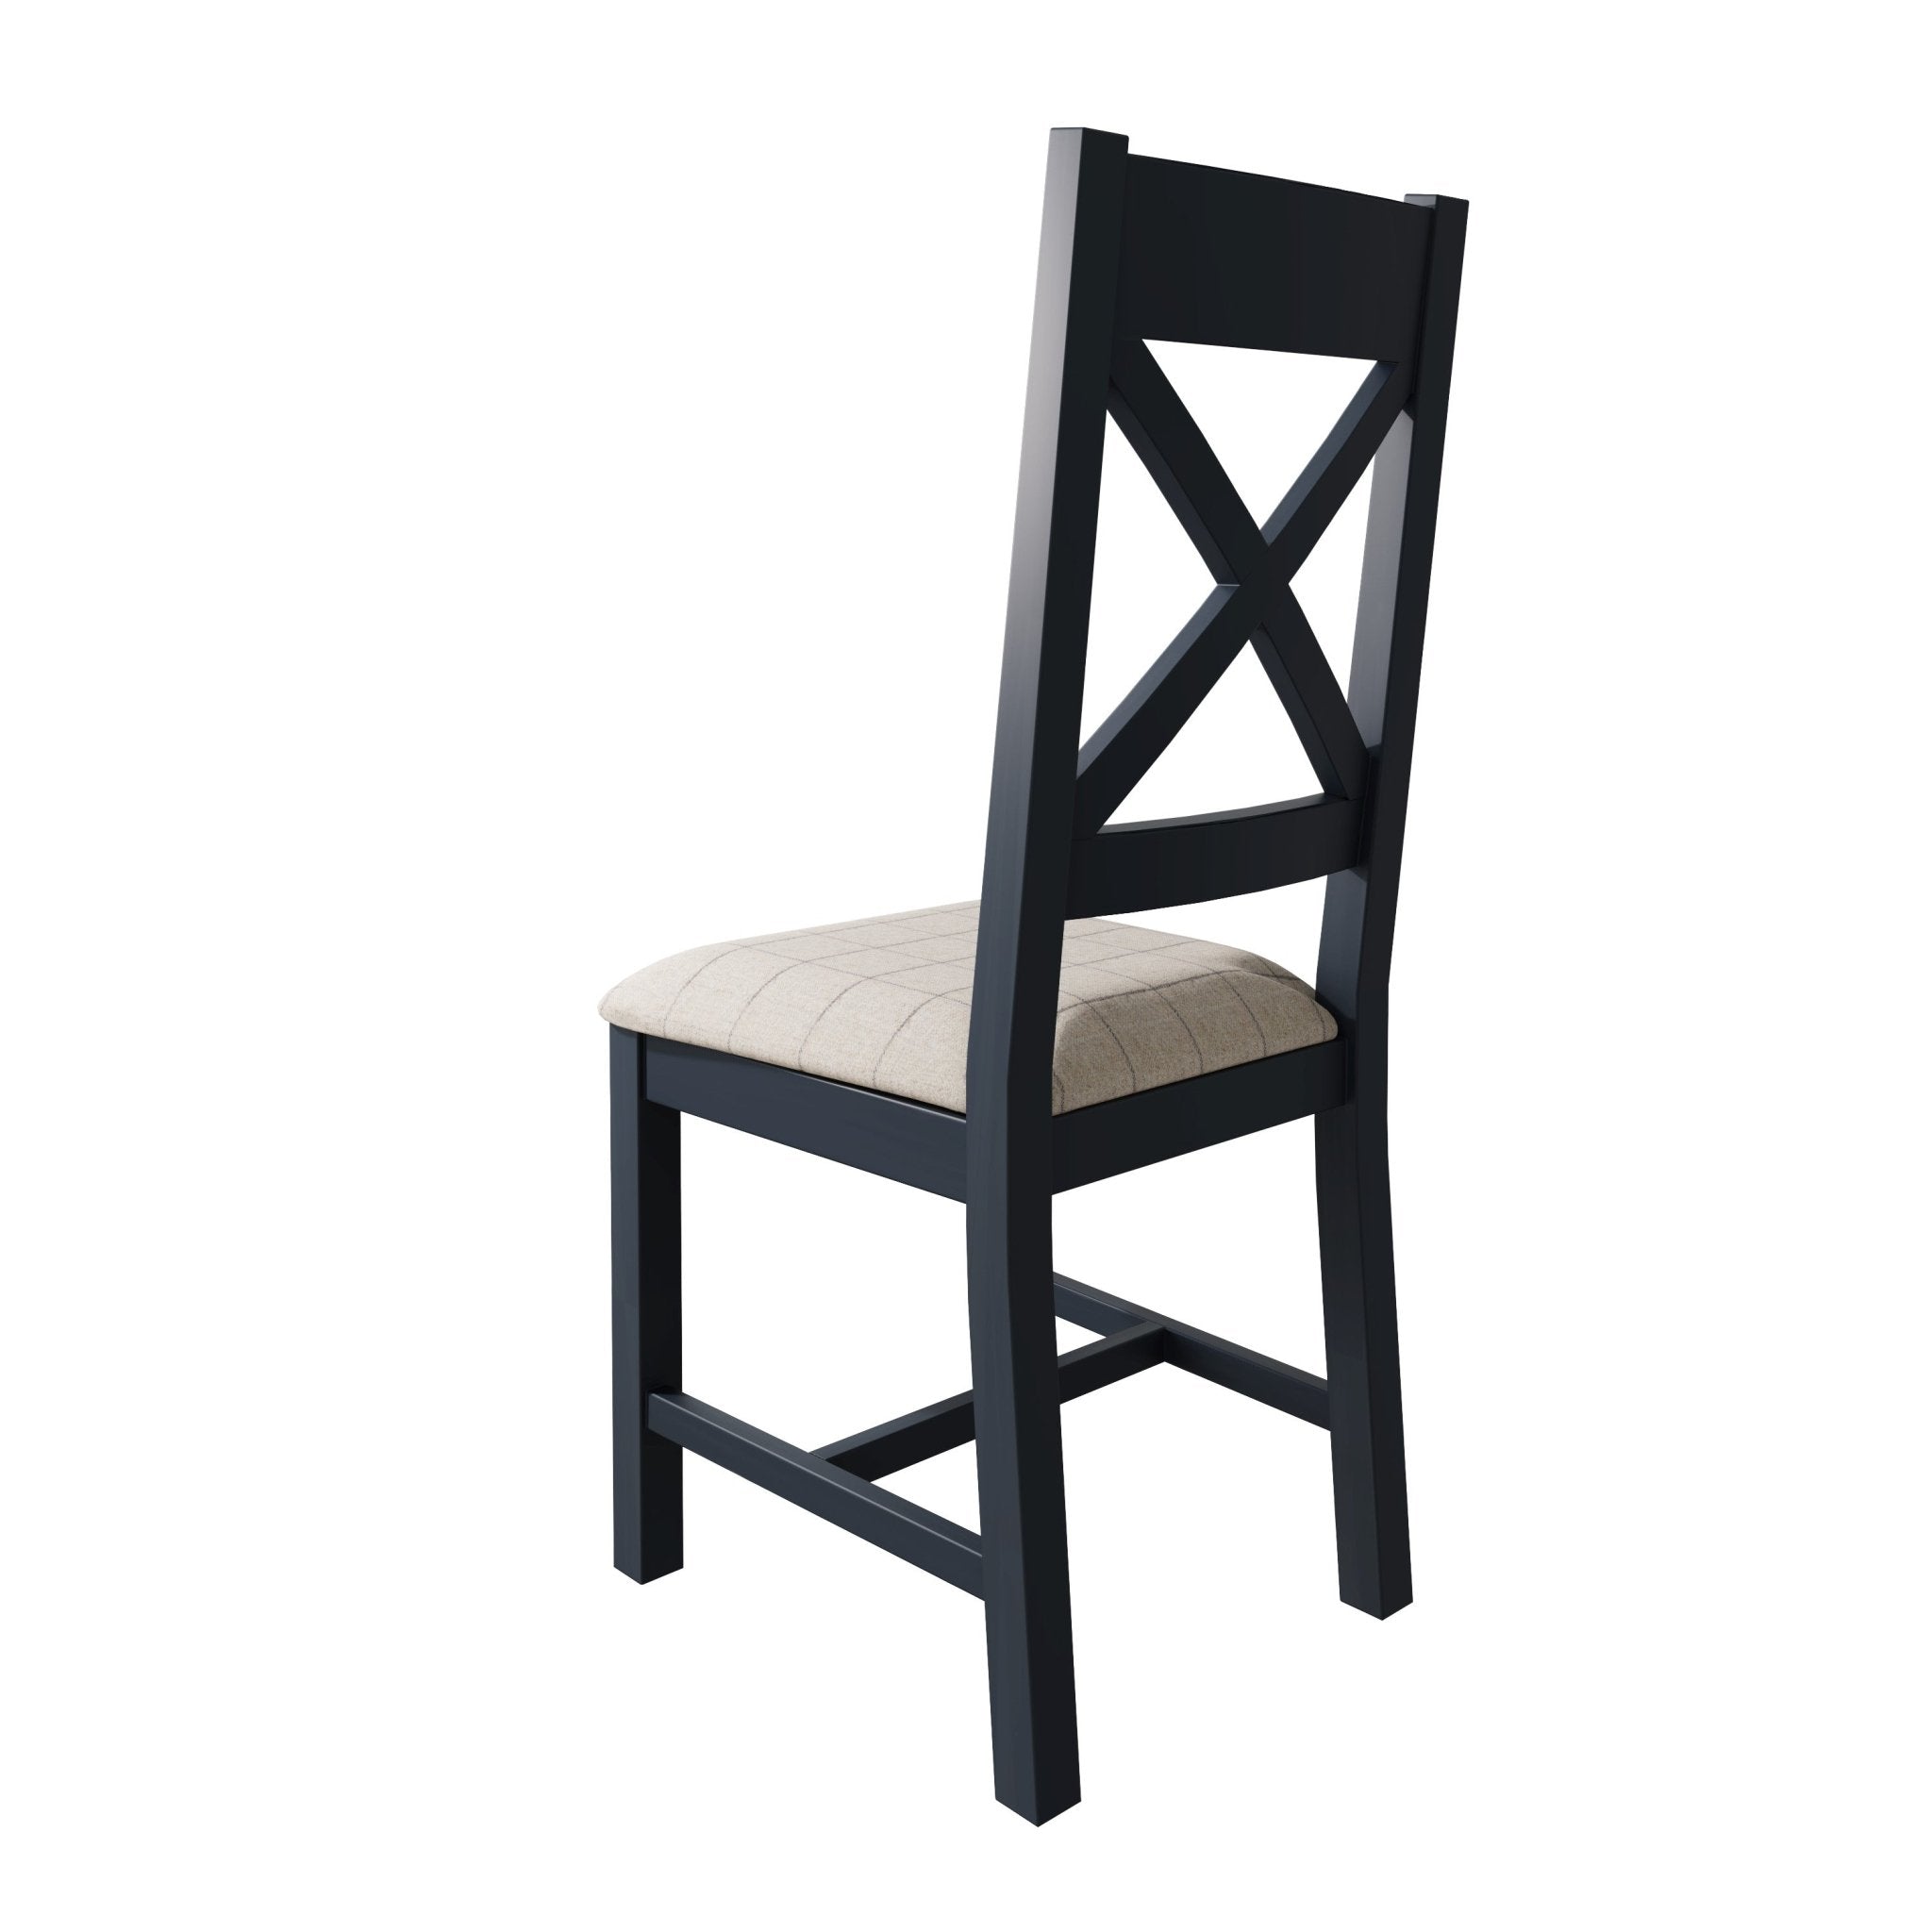 Rogate Blue Painted Cross Back Fabric Dining Chair - Natural Check - Duck Barn Interiors